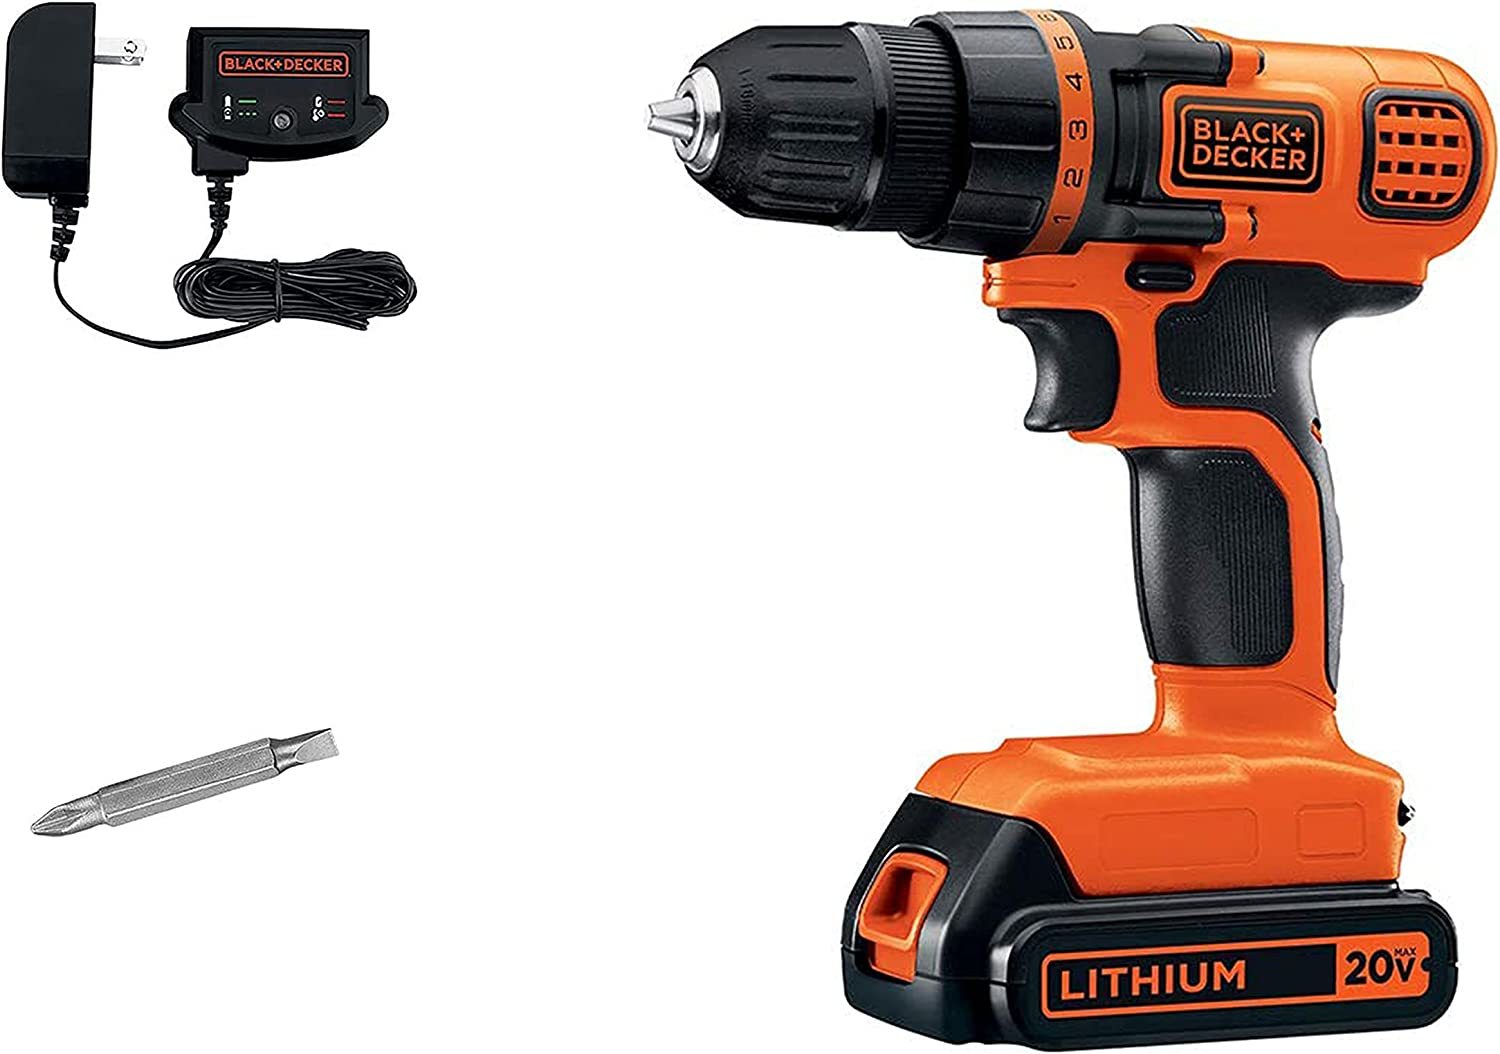 Primary image for Black Decker 20V Max* Cordless Drill / Driver, 3/8-Inch (Ldx120C).